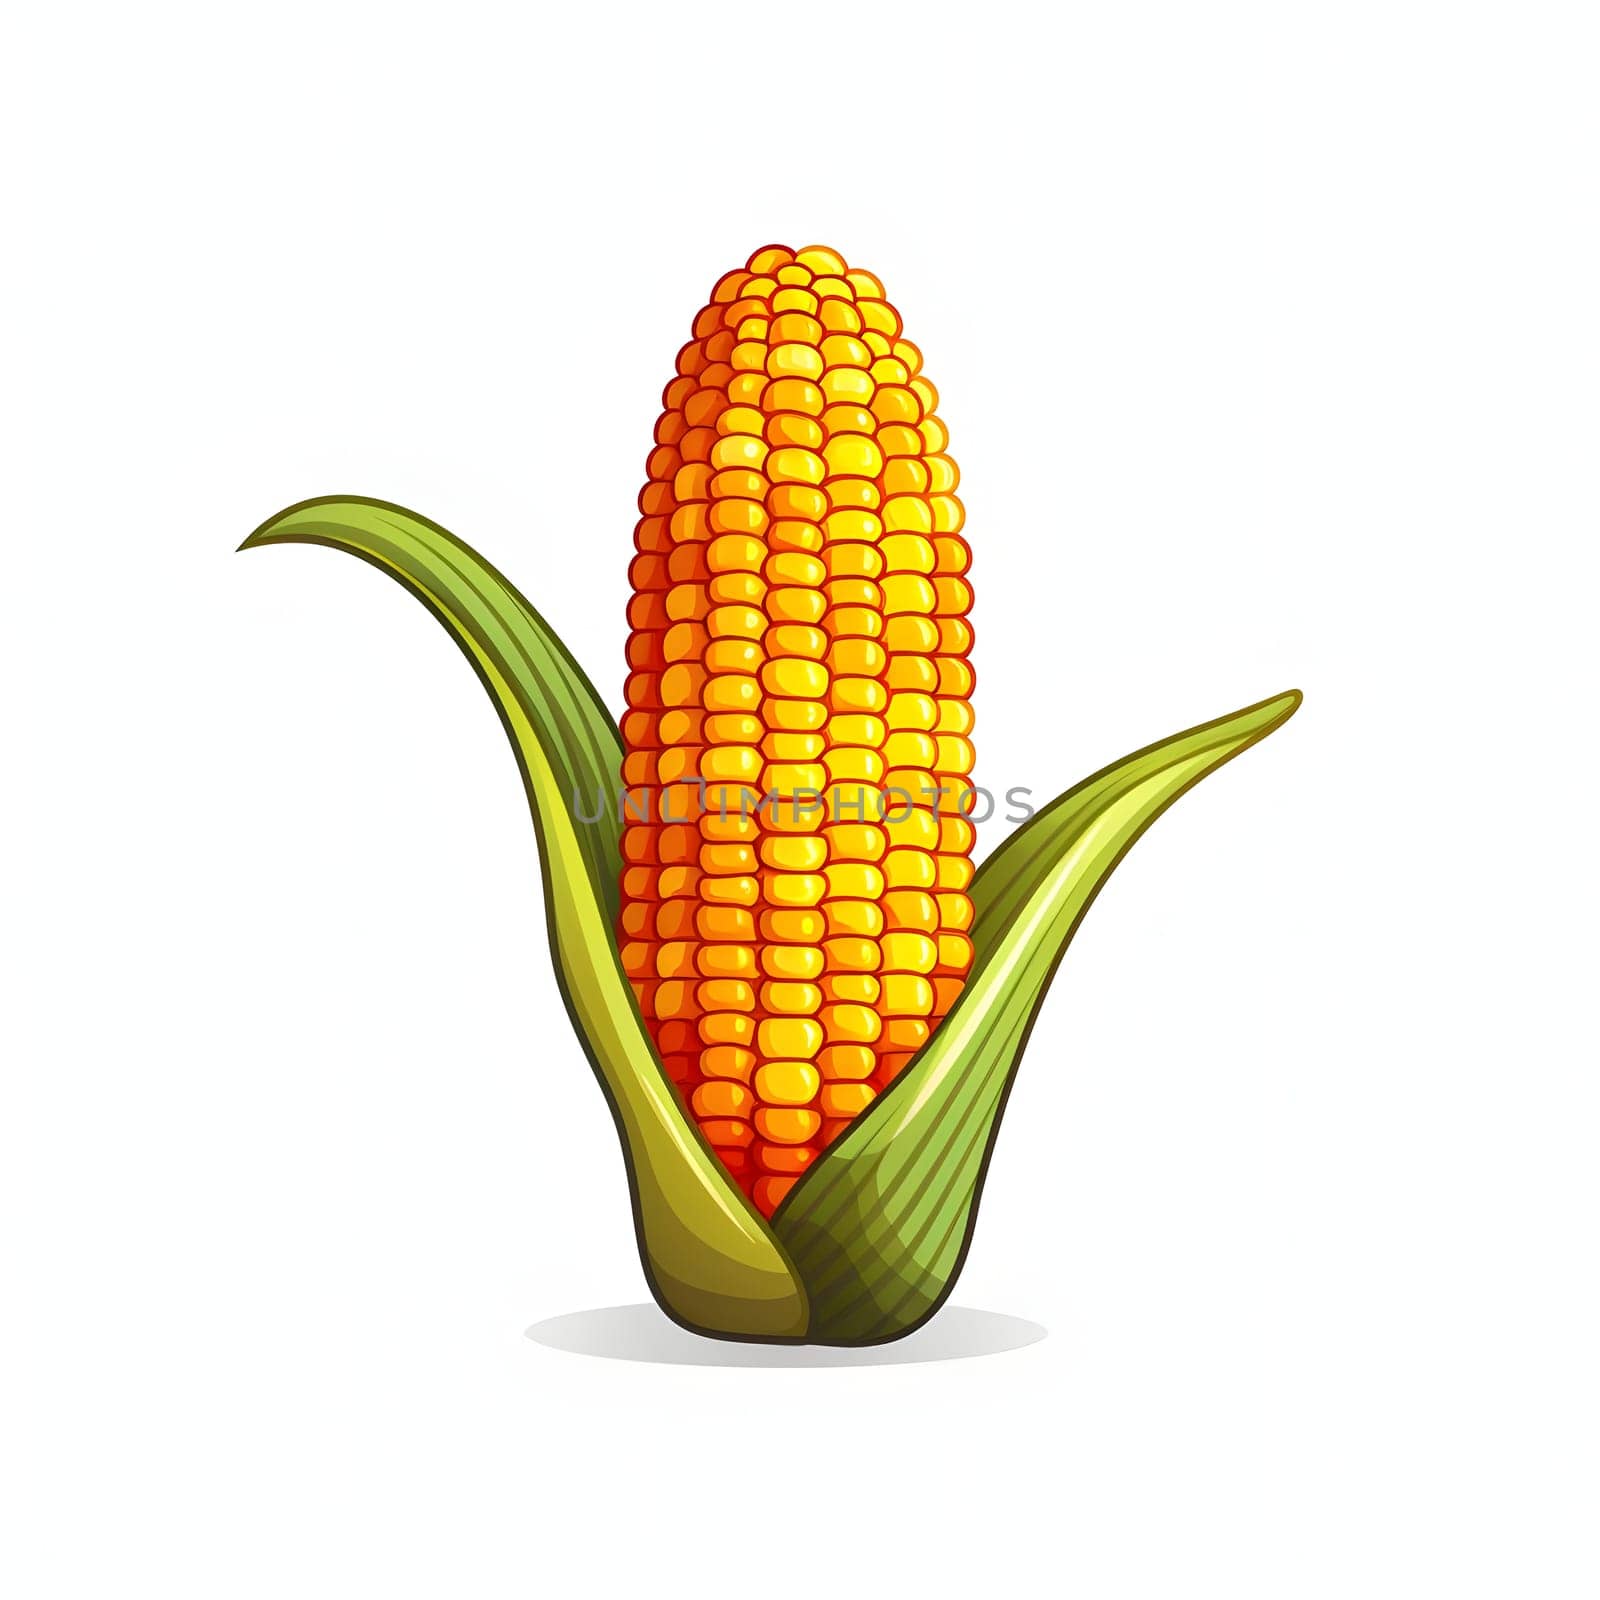 Cob of corn. Corn as a dish of thanksgiving for the harvest, picture on a white isolated background. An atmosphere of joy and celebration.